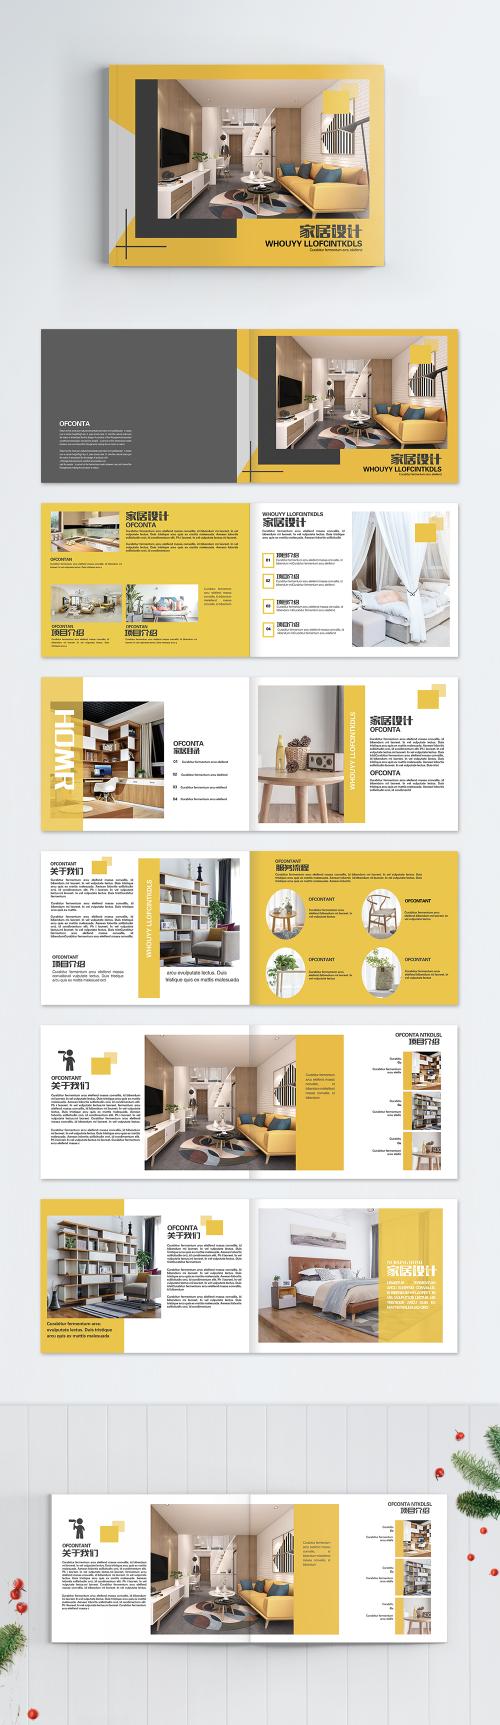 LovePik - yellow high end home promotion brochure - 400825594